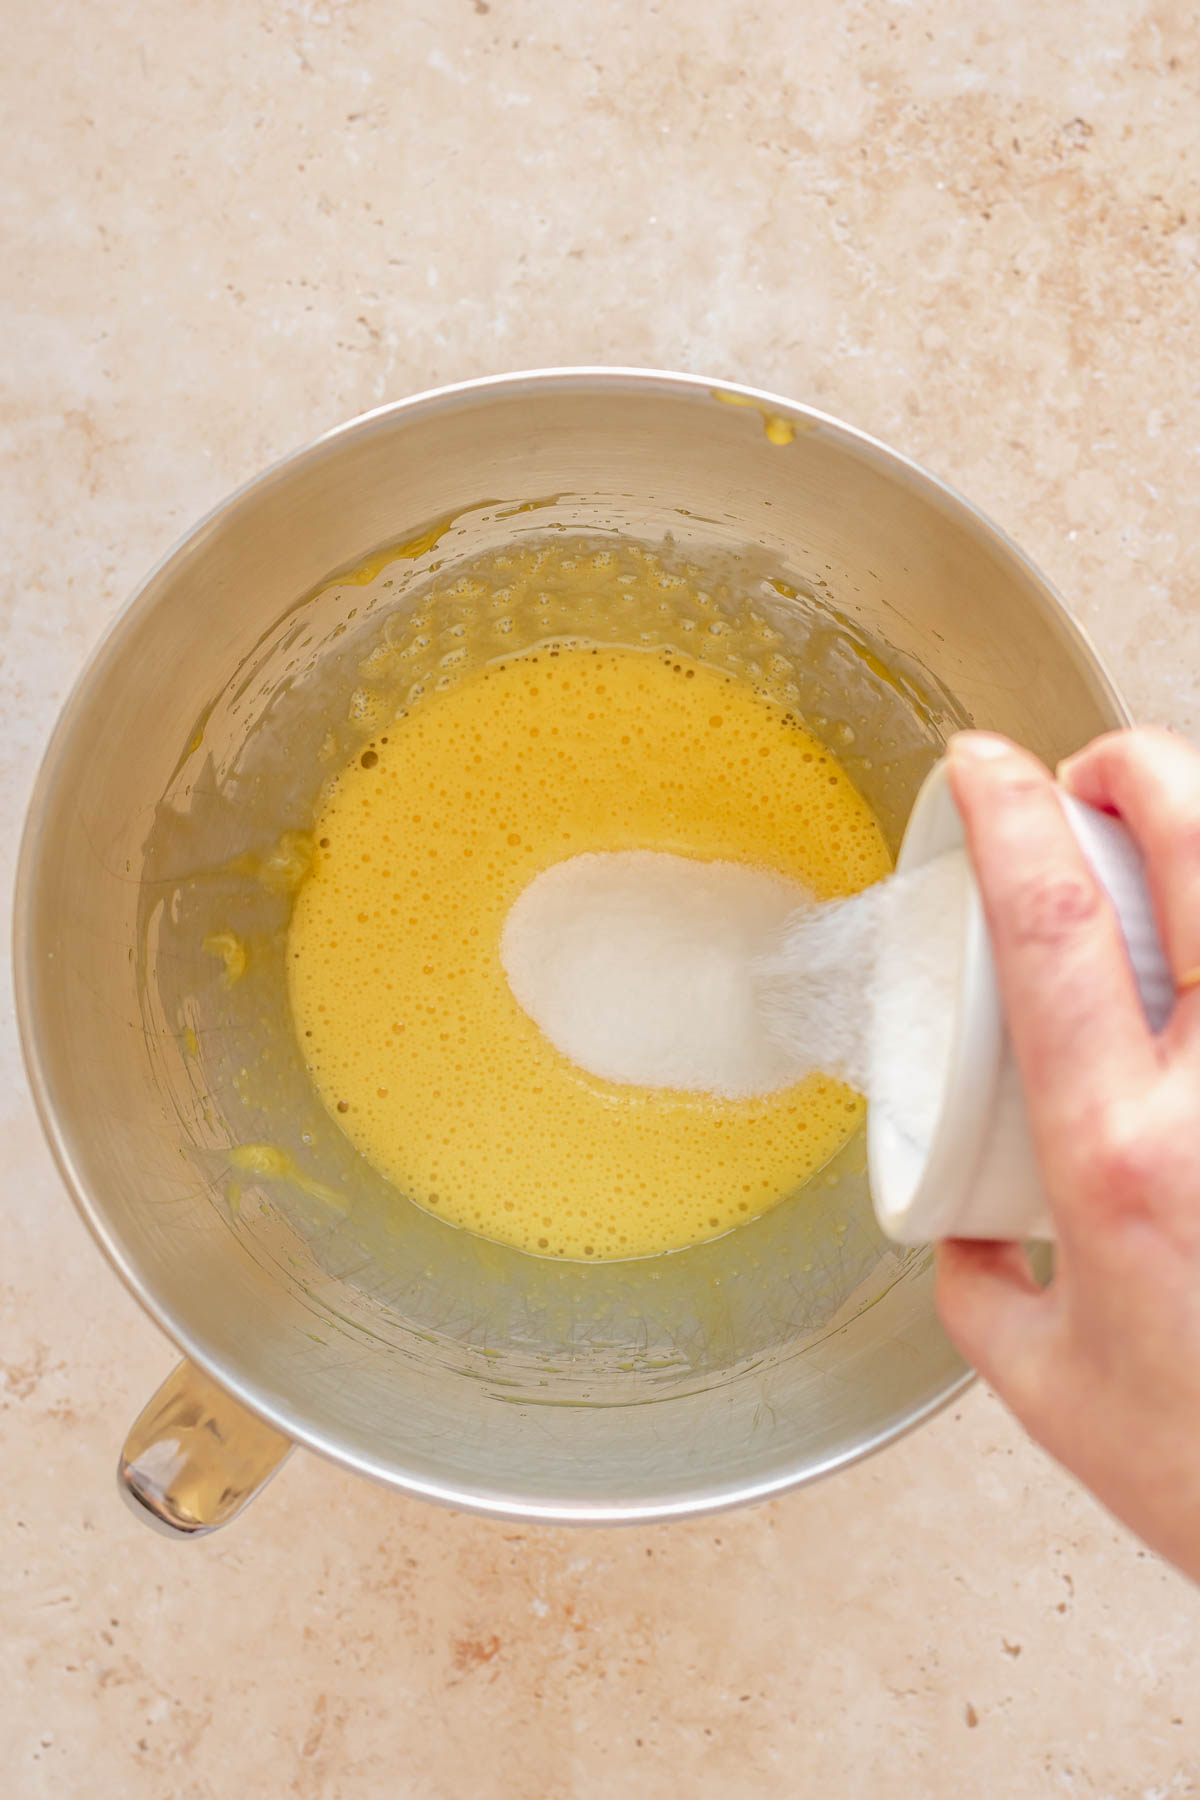 Sugar being poured into beaten egg yolks.